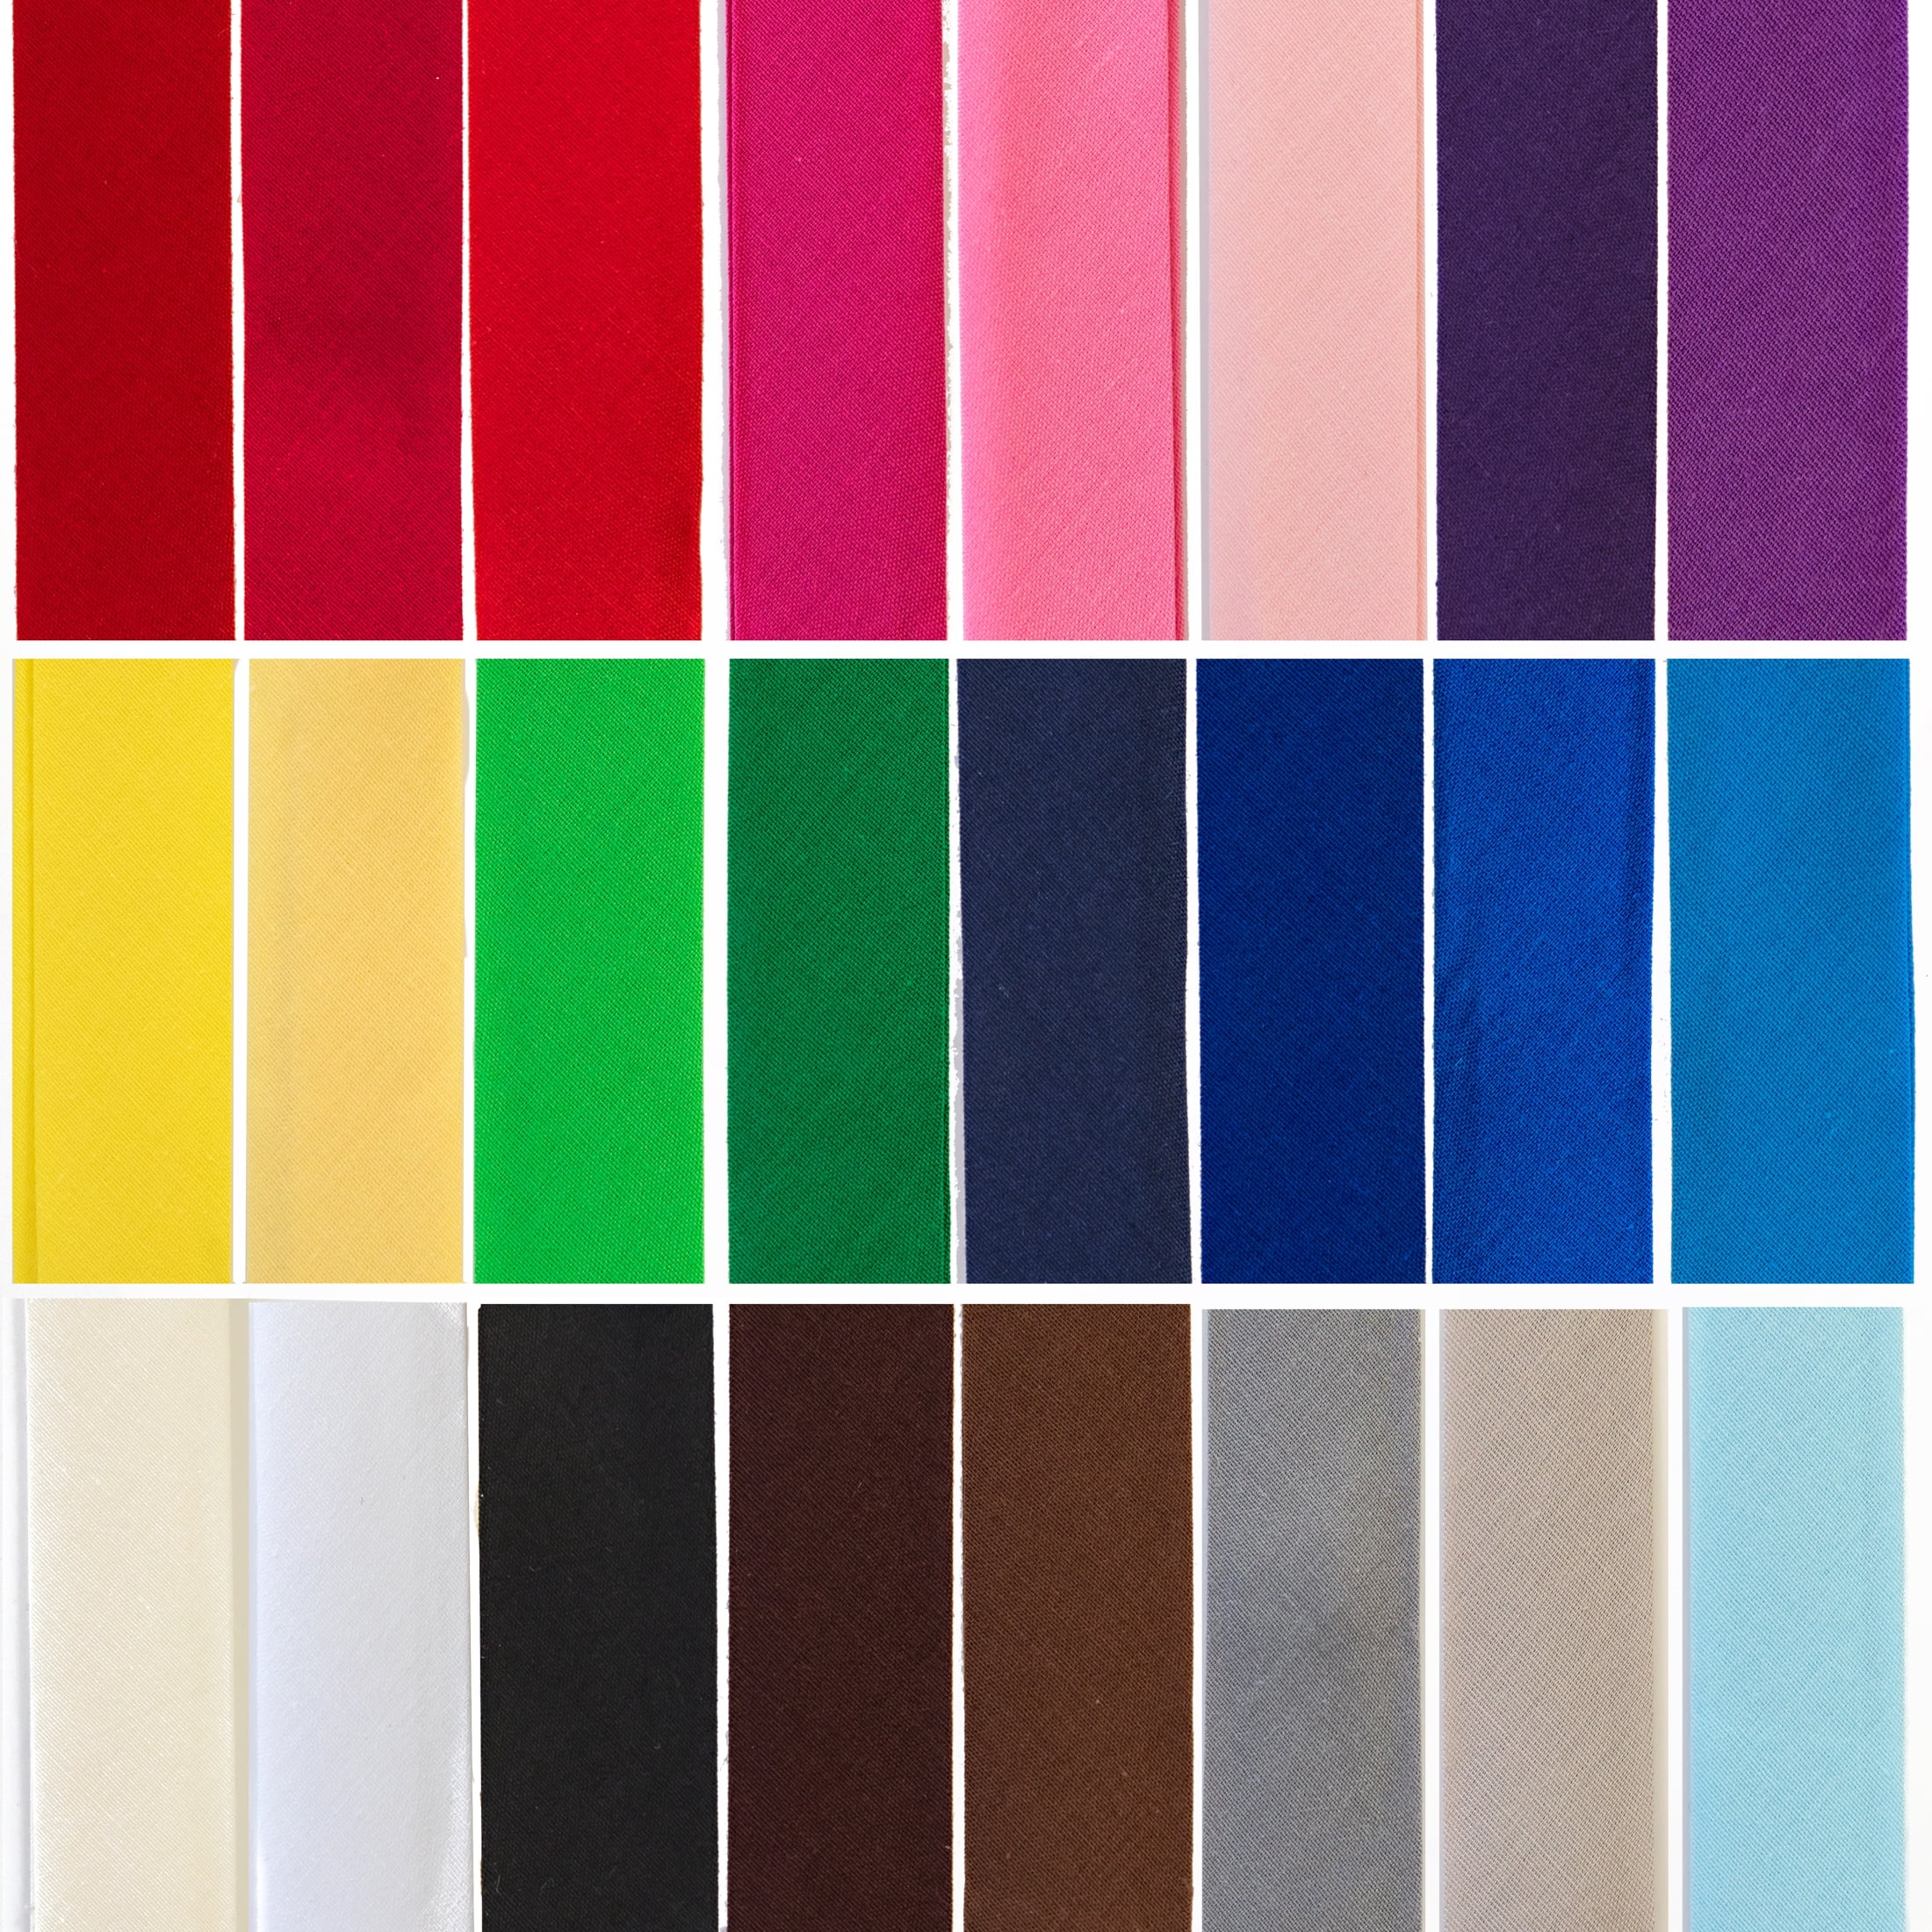 Wrights Satin Blanket Binding = Now 6 Great Colors! 2 x 4 3/4